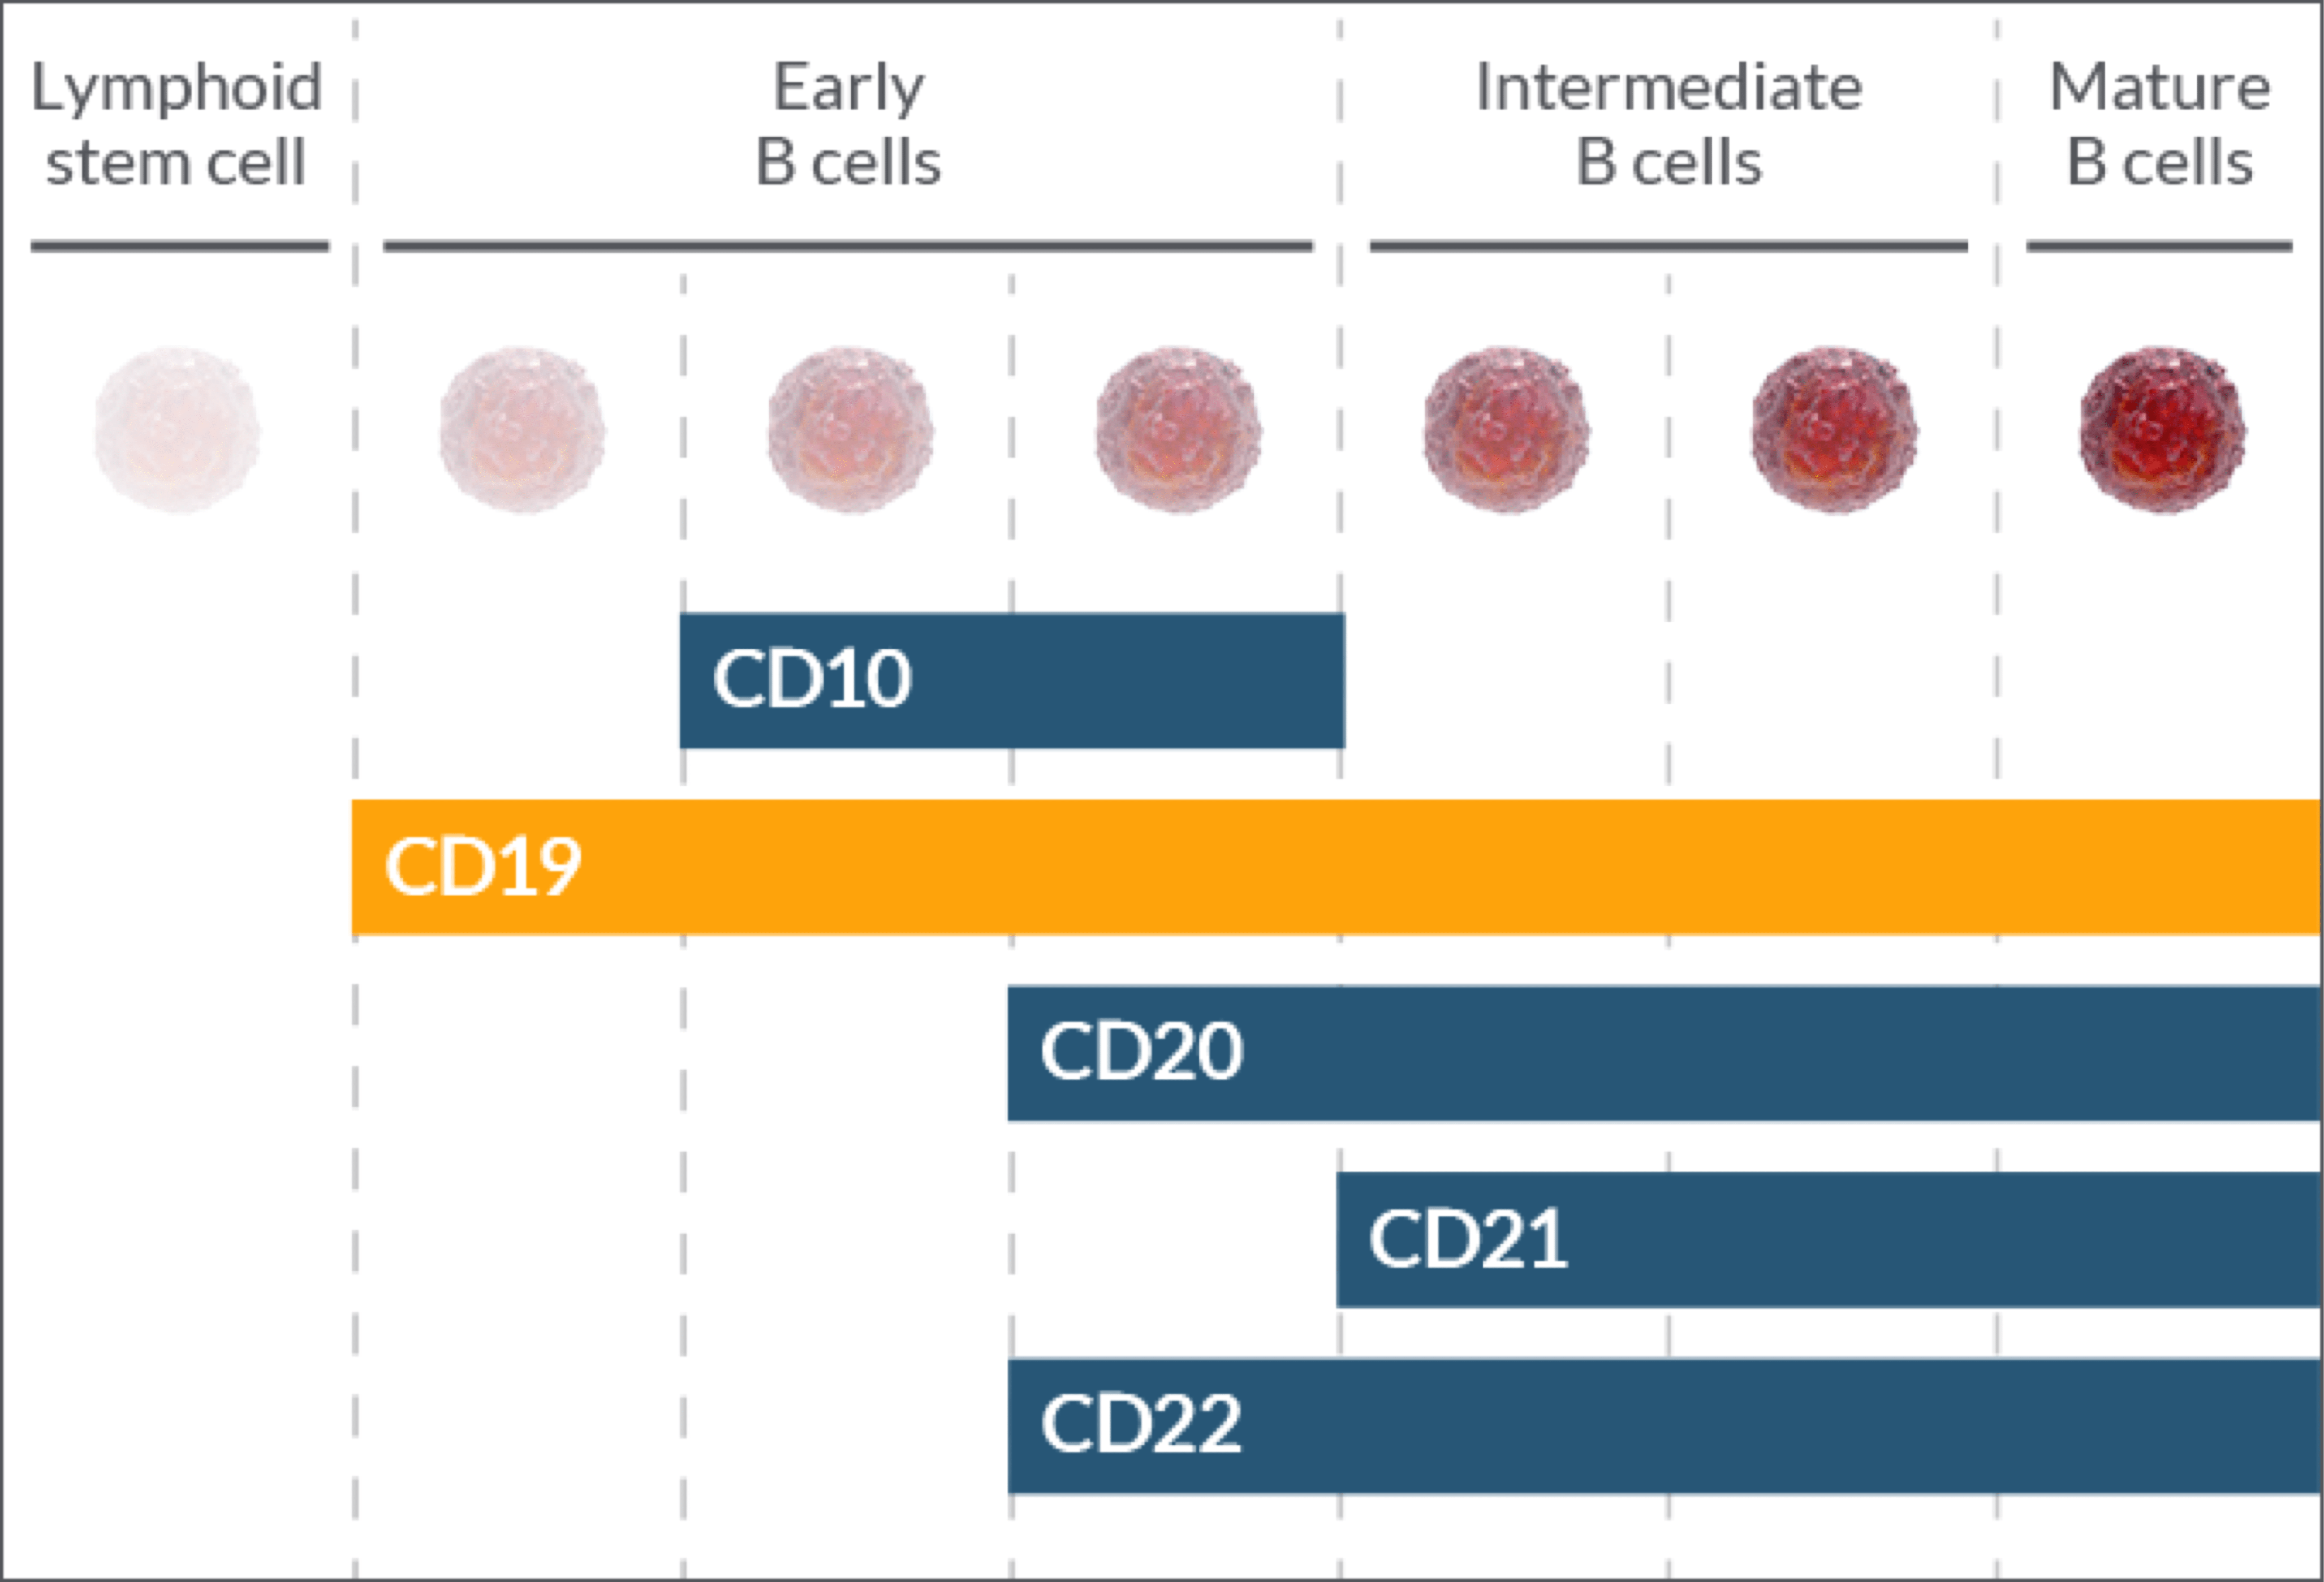 CD19 is found in early, intermediate, and mature B cells